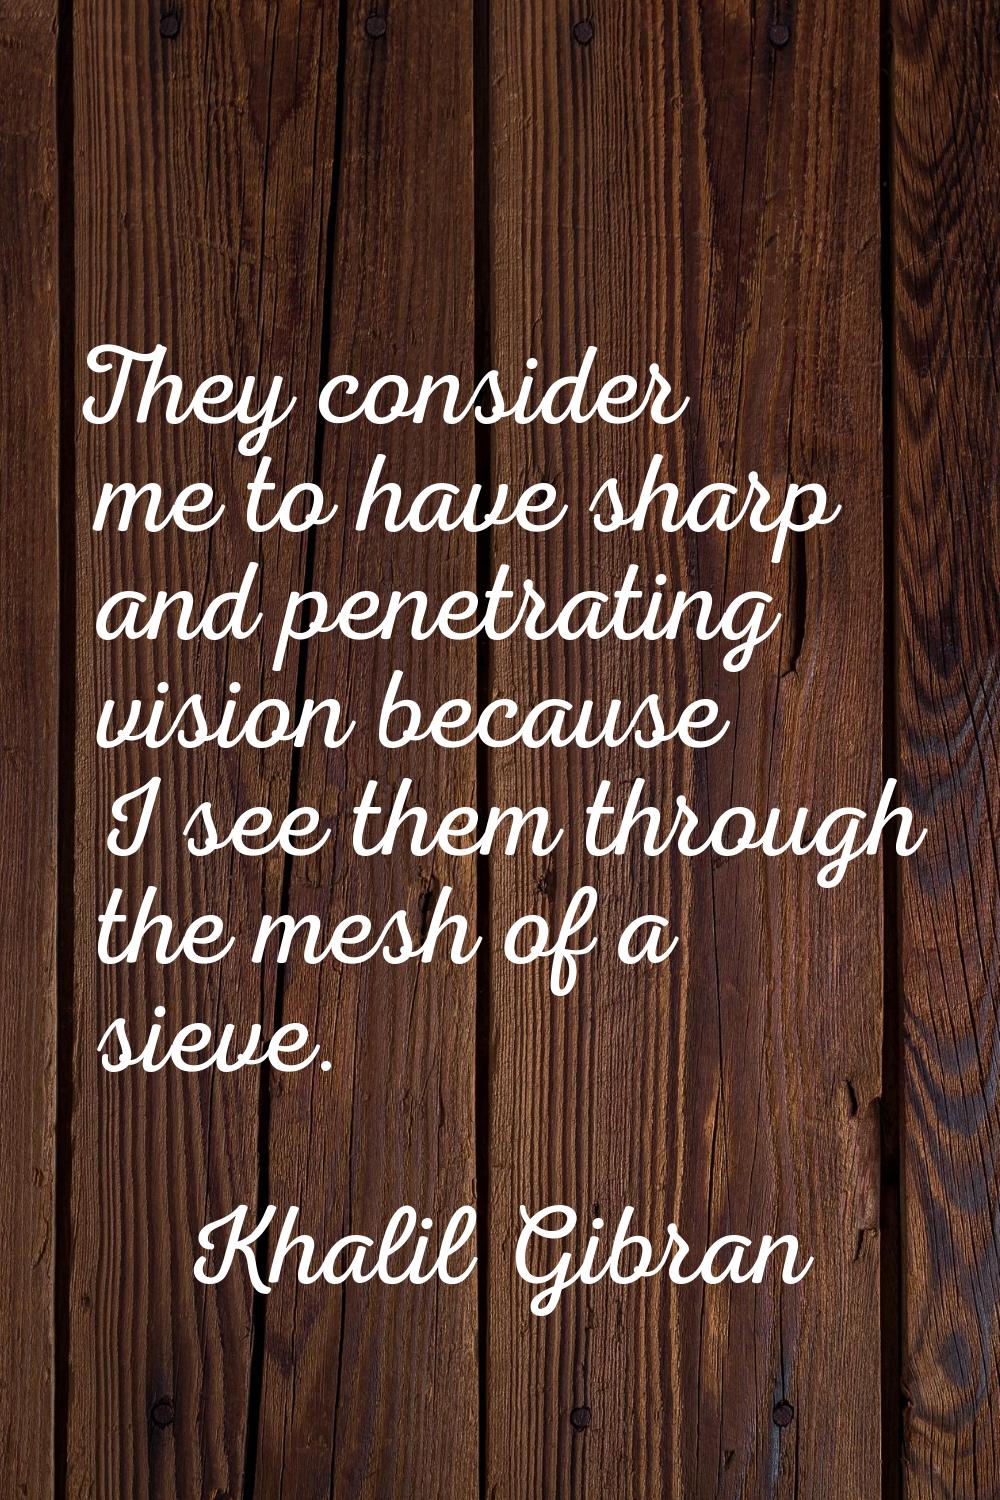 They consider me to have sharp and penetrating vision because I see them through the mesh of a siev